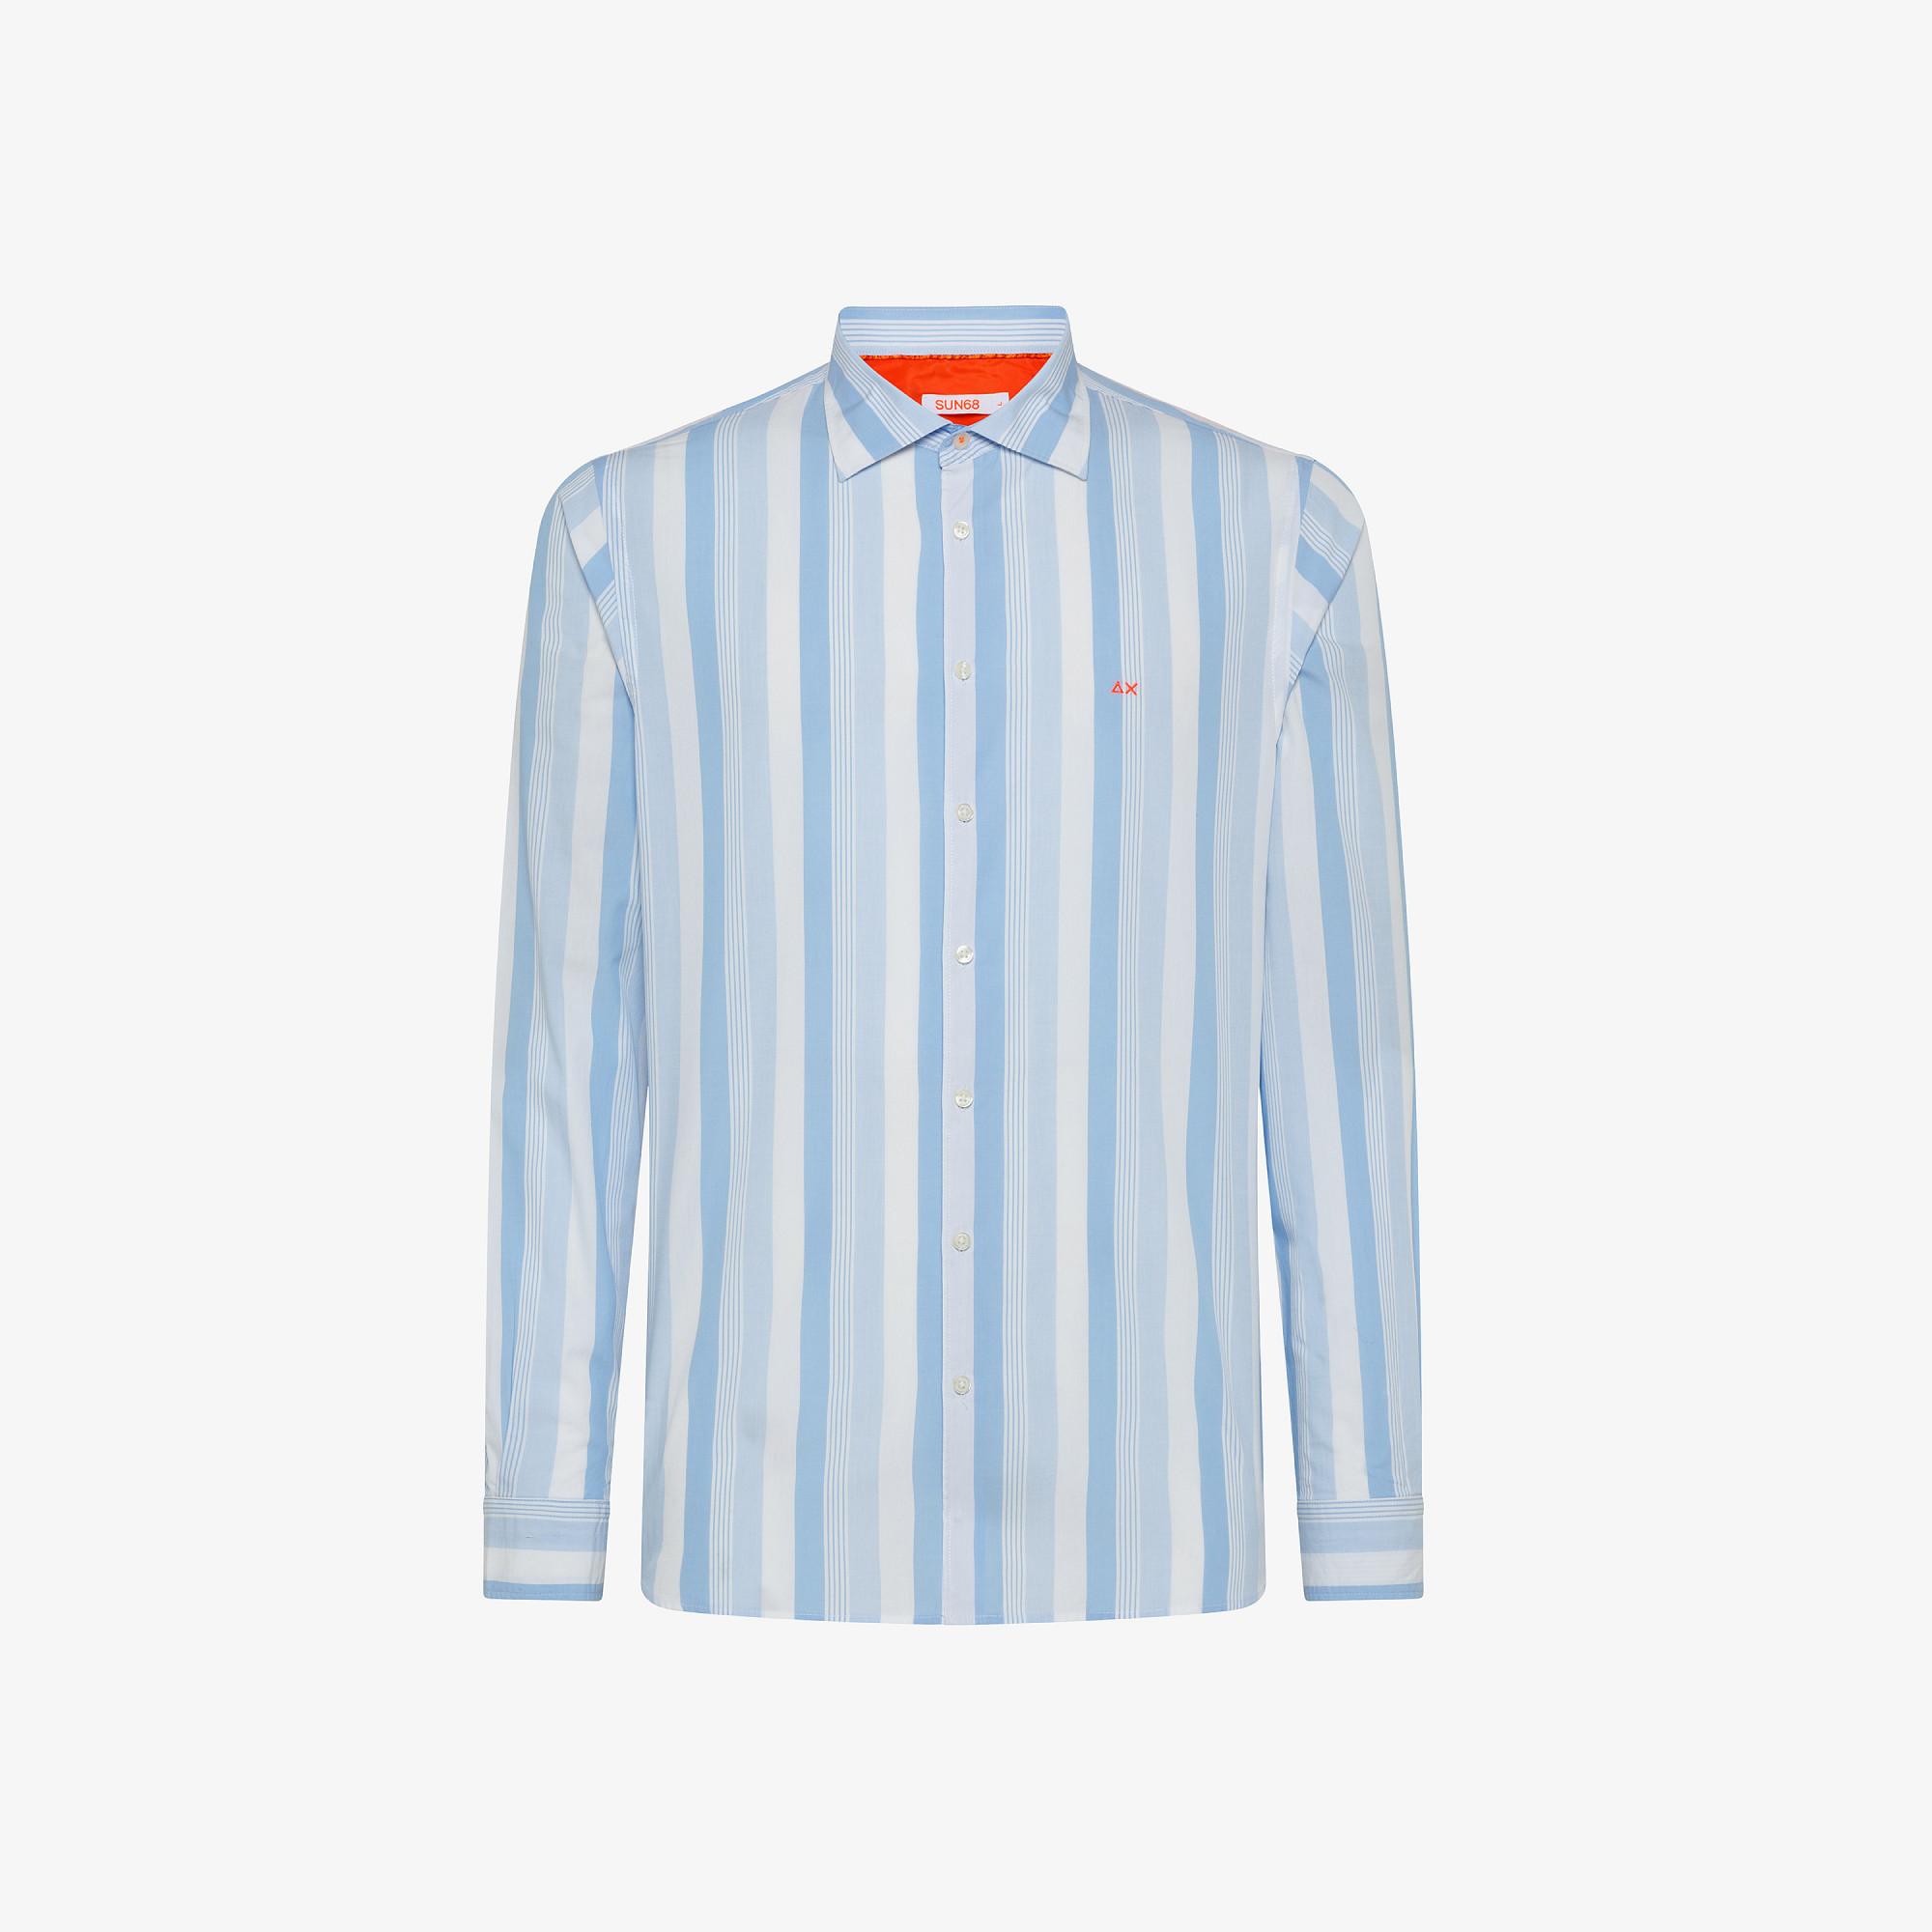 SHIRT CLASSIC STRIPES WITH FLUO DETAIL BIANCO/SKY BLUE